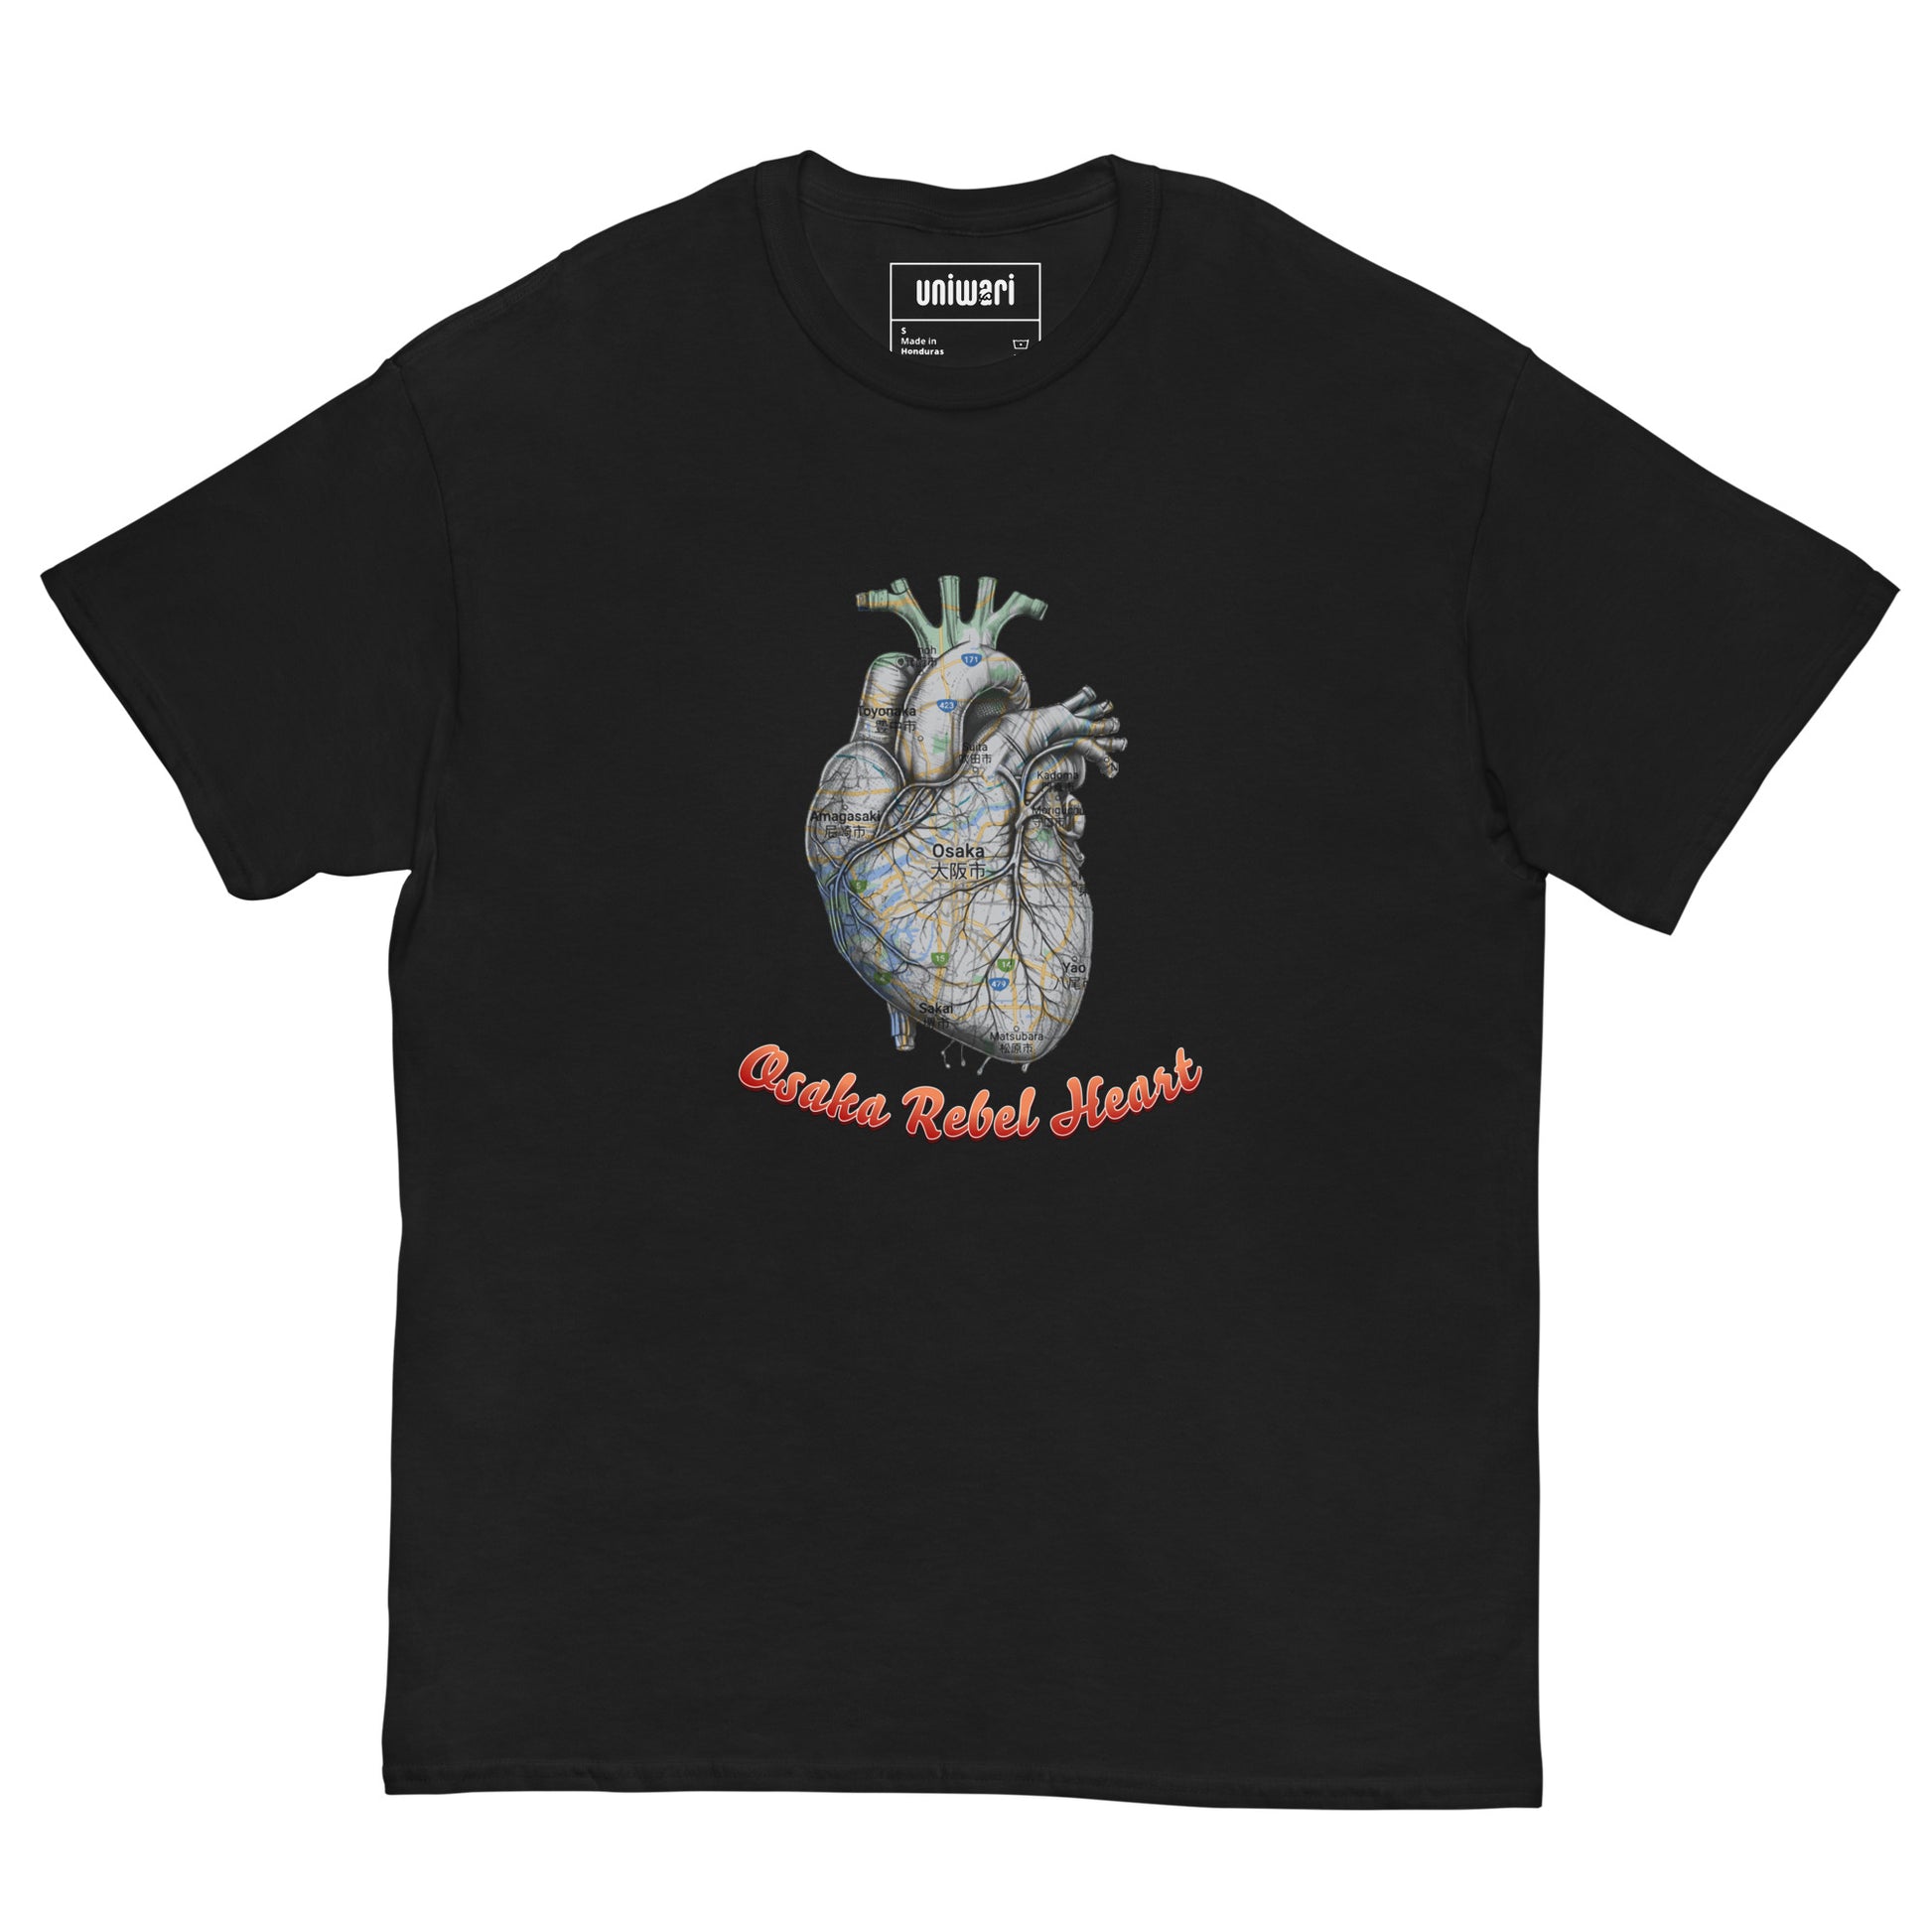 Black High Quality Tee - Front Design with a Heart Shaped Map of Osaka and a Phrase "Osaka Rebel Heart" print